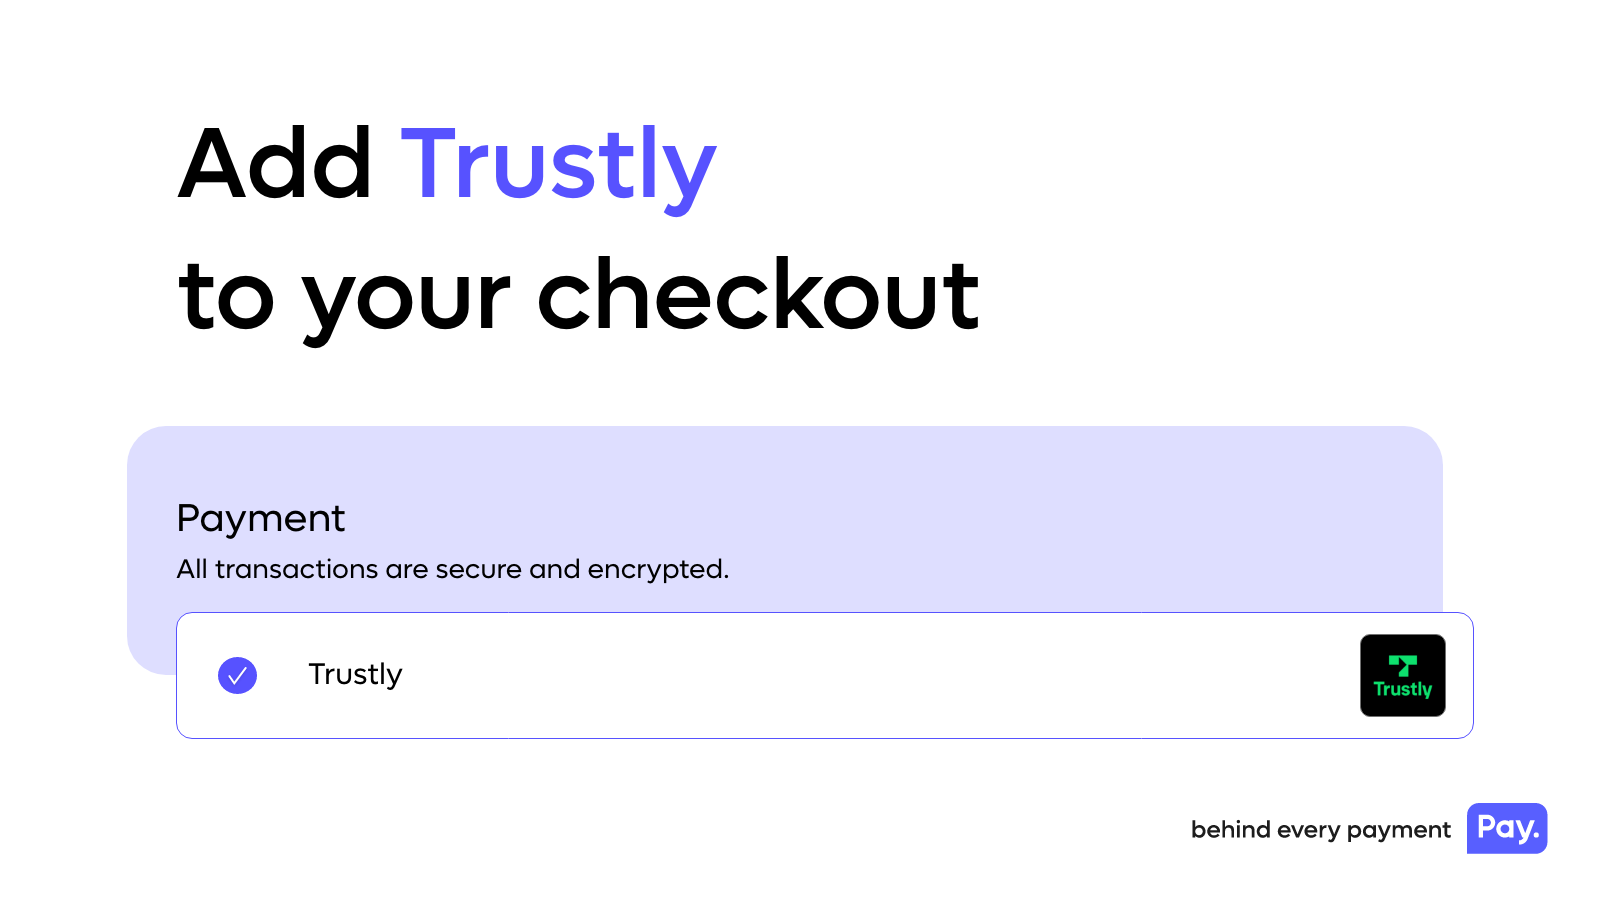 Voeg Trustly toe aan je checkout